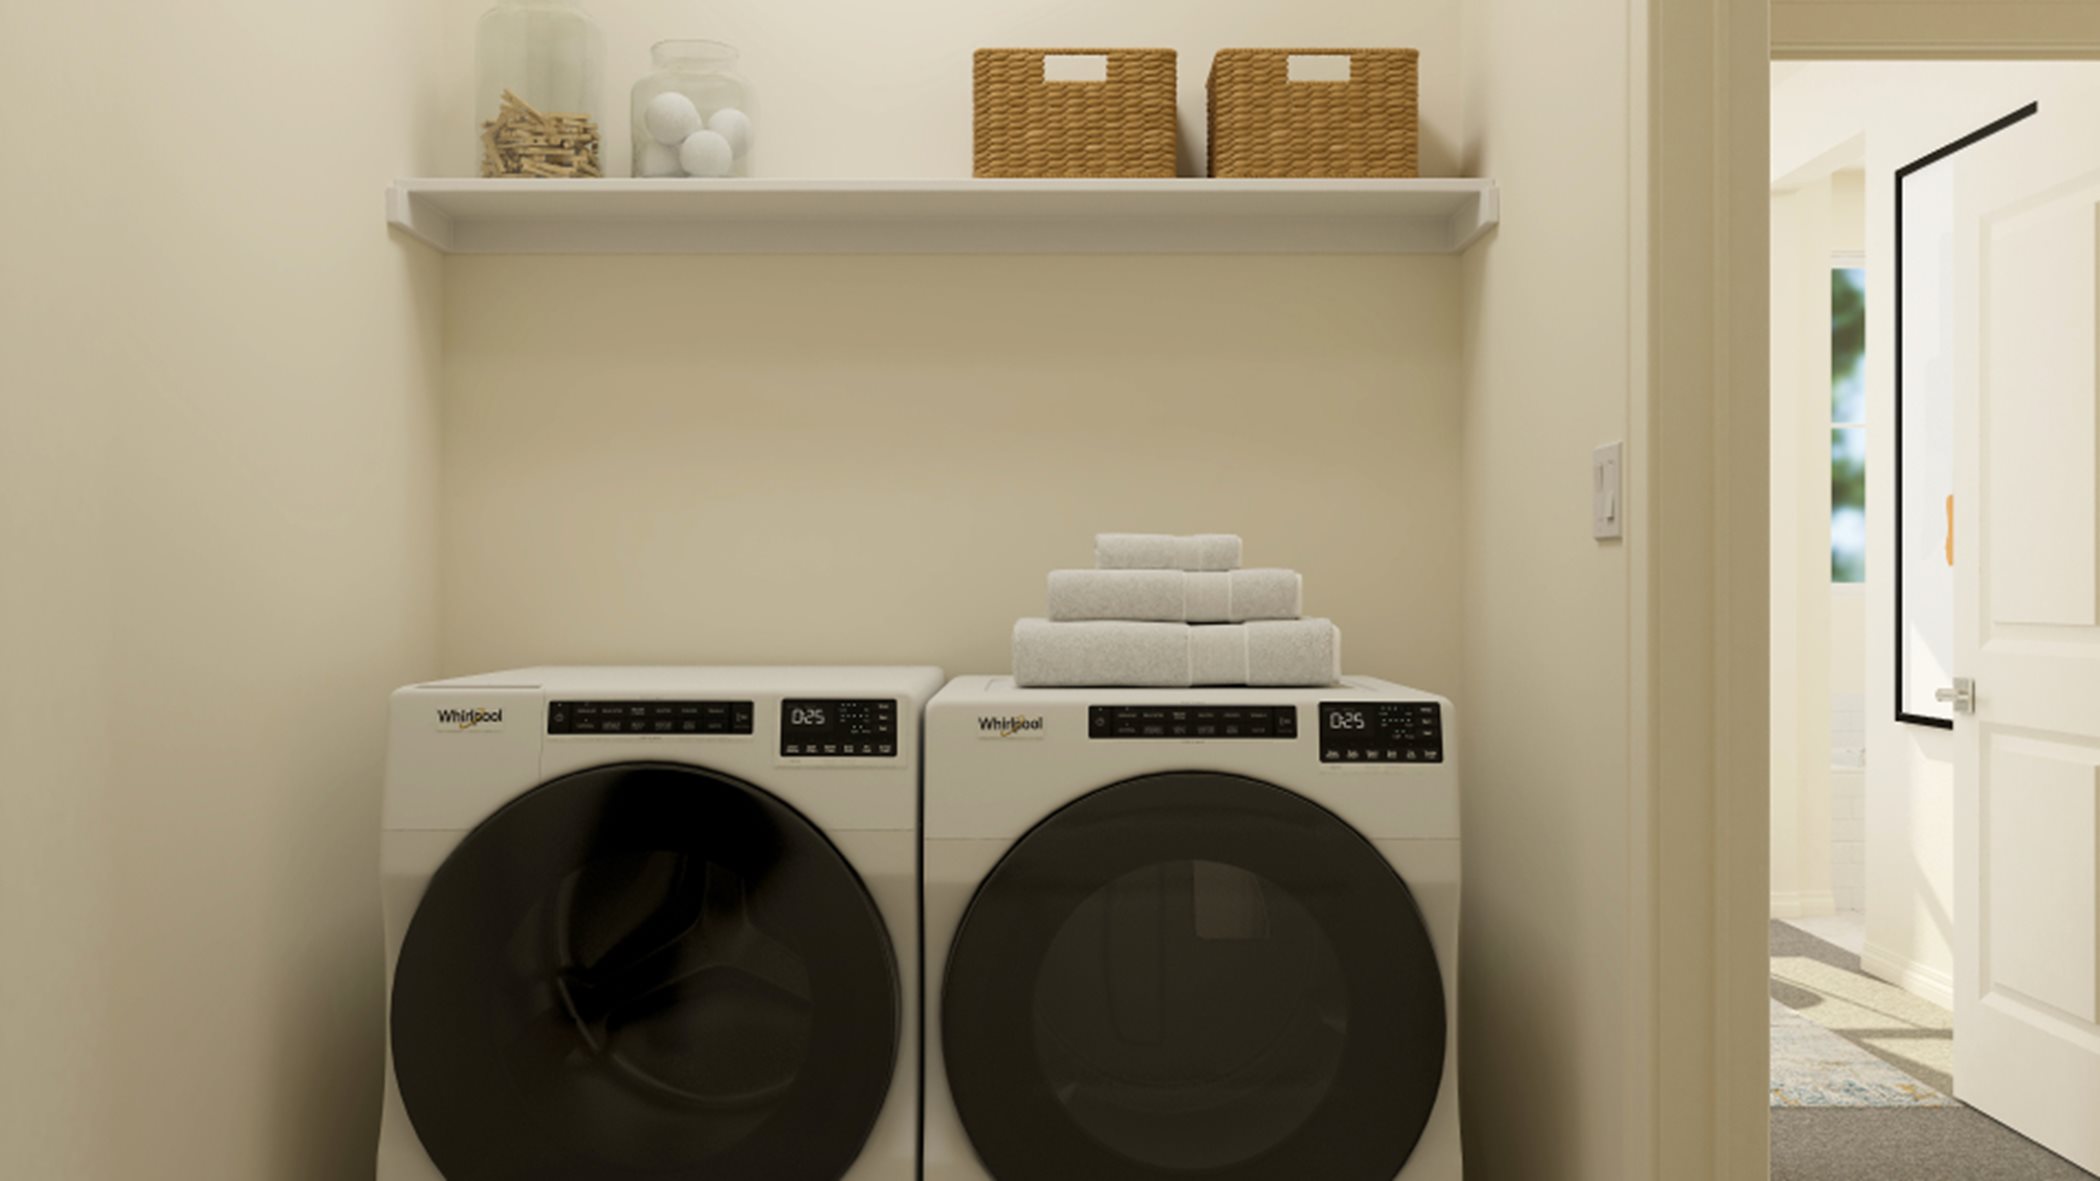 Laundry room with overhead shelving and a washer and dryer